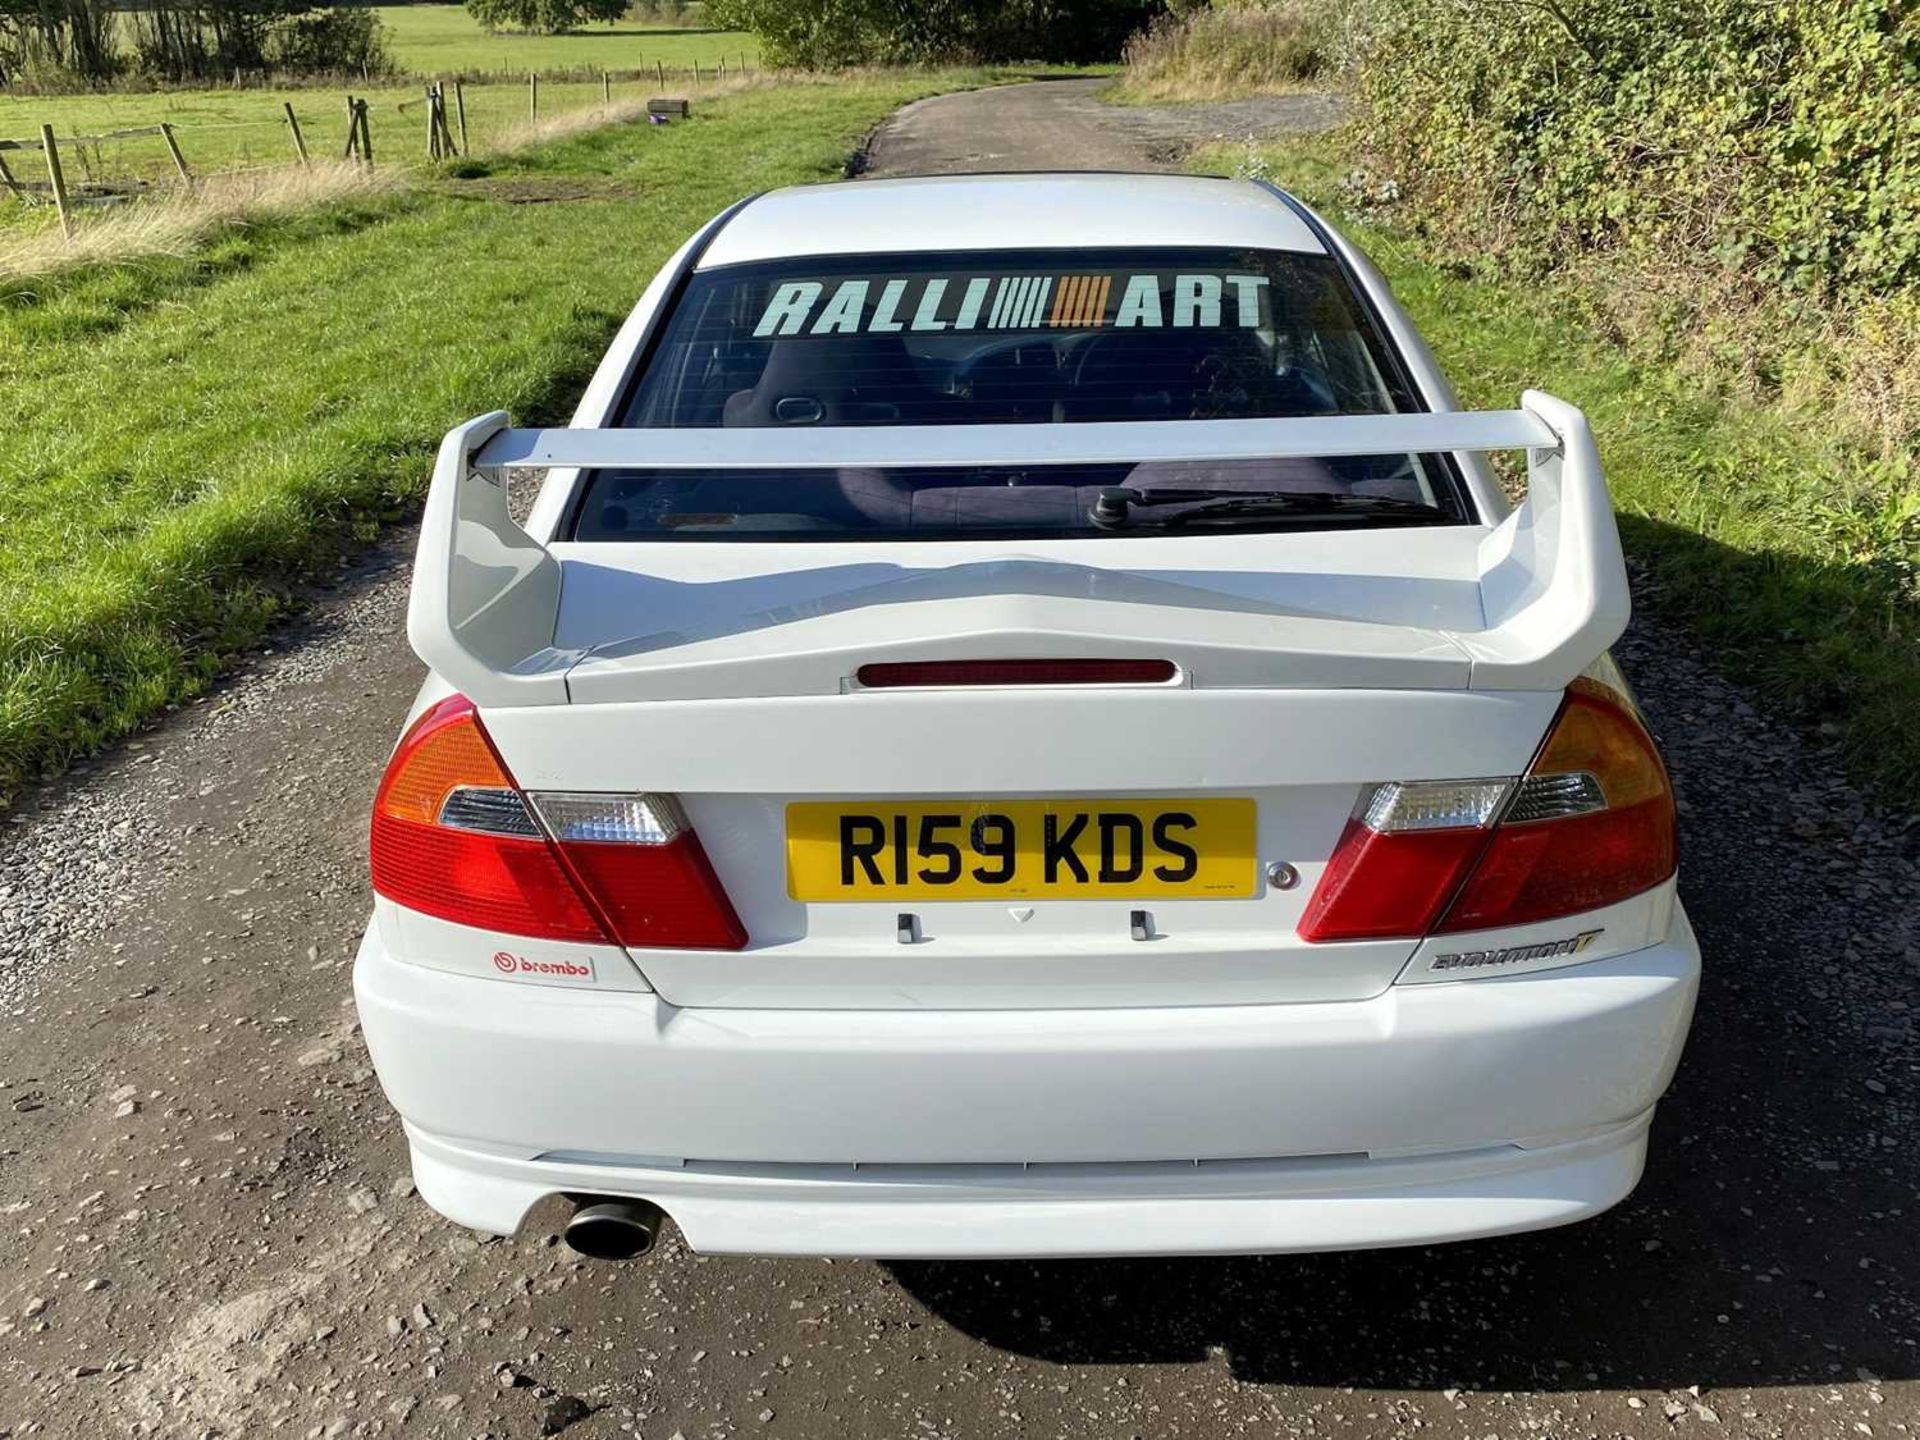 1998 Mitsubishi Lancer Evolution V GSR One UK keeper since being imported two years ago - Image 16 of 100